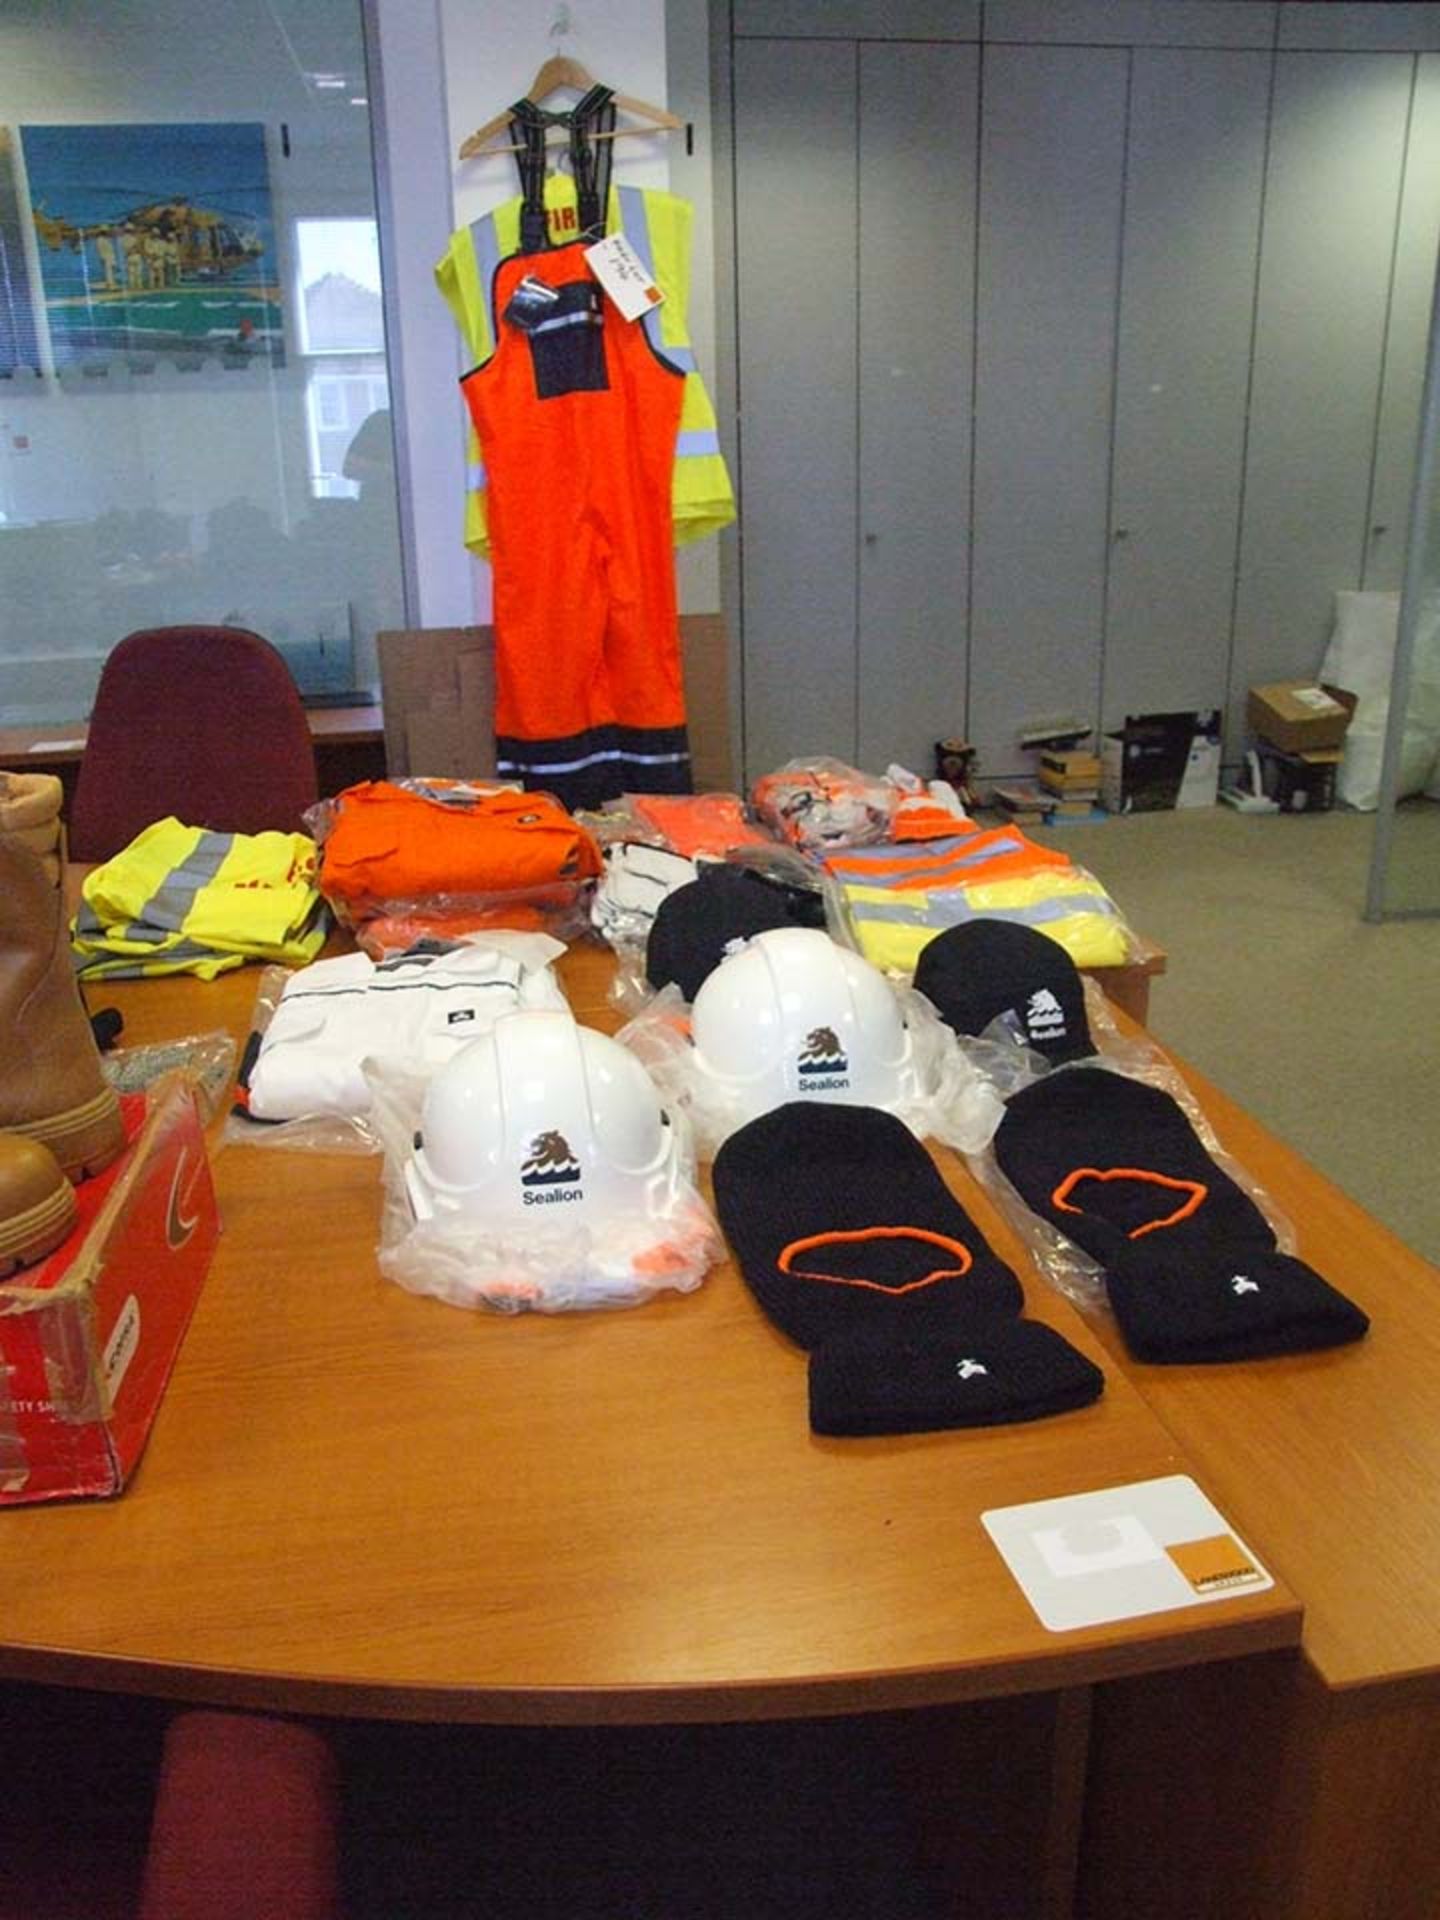 Safety Wear inc Hi Viz vests and trousers with gloves Hats and other sundries